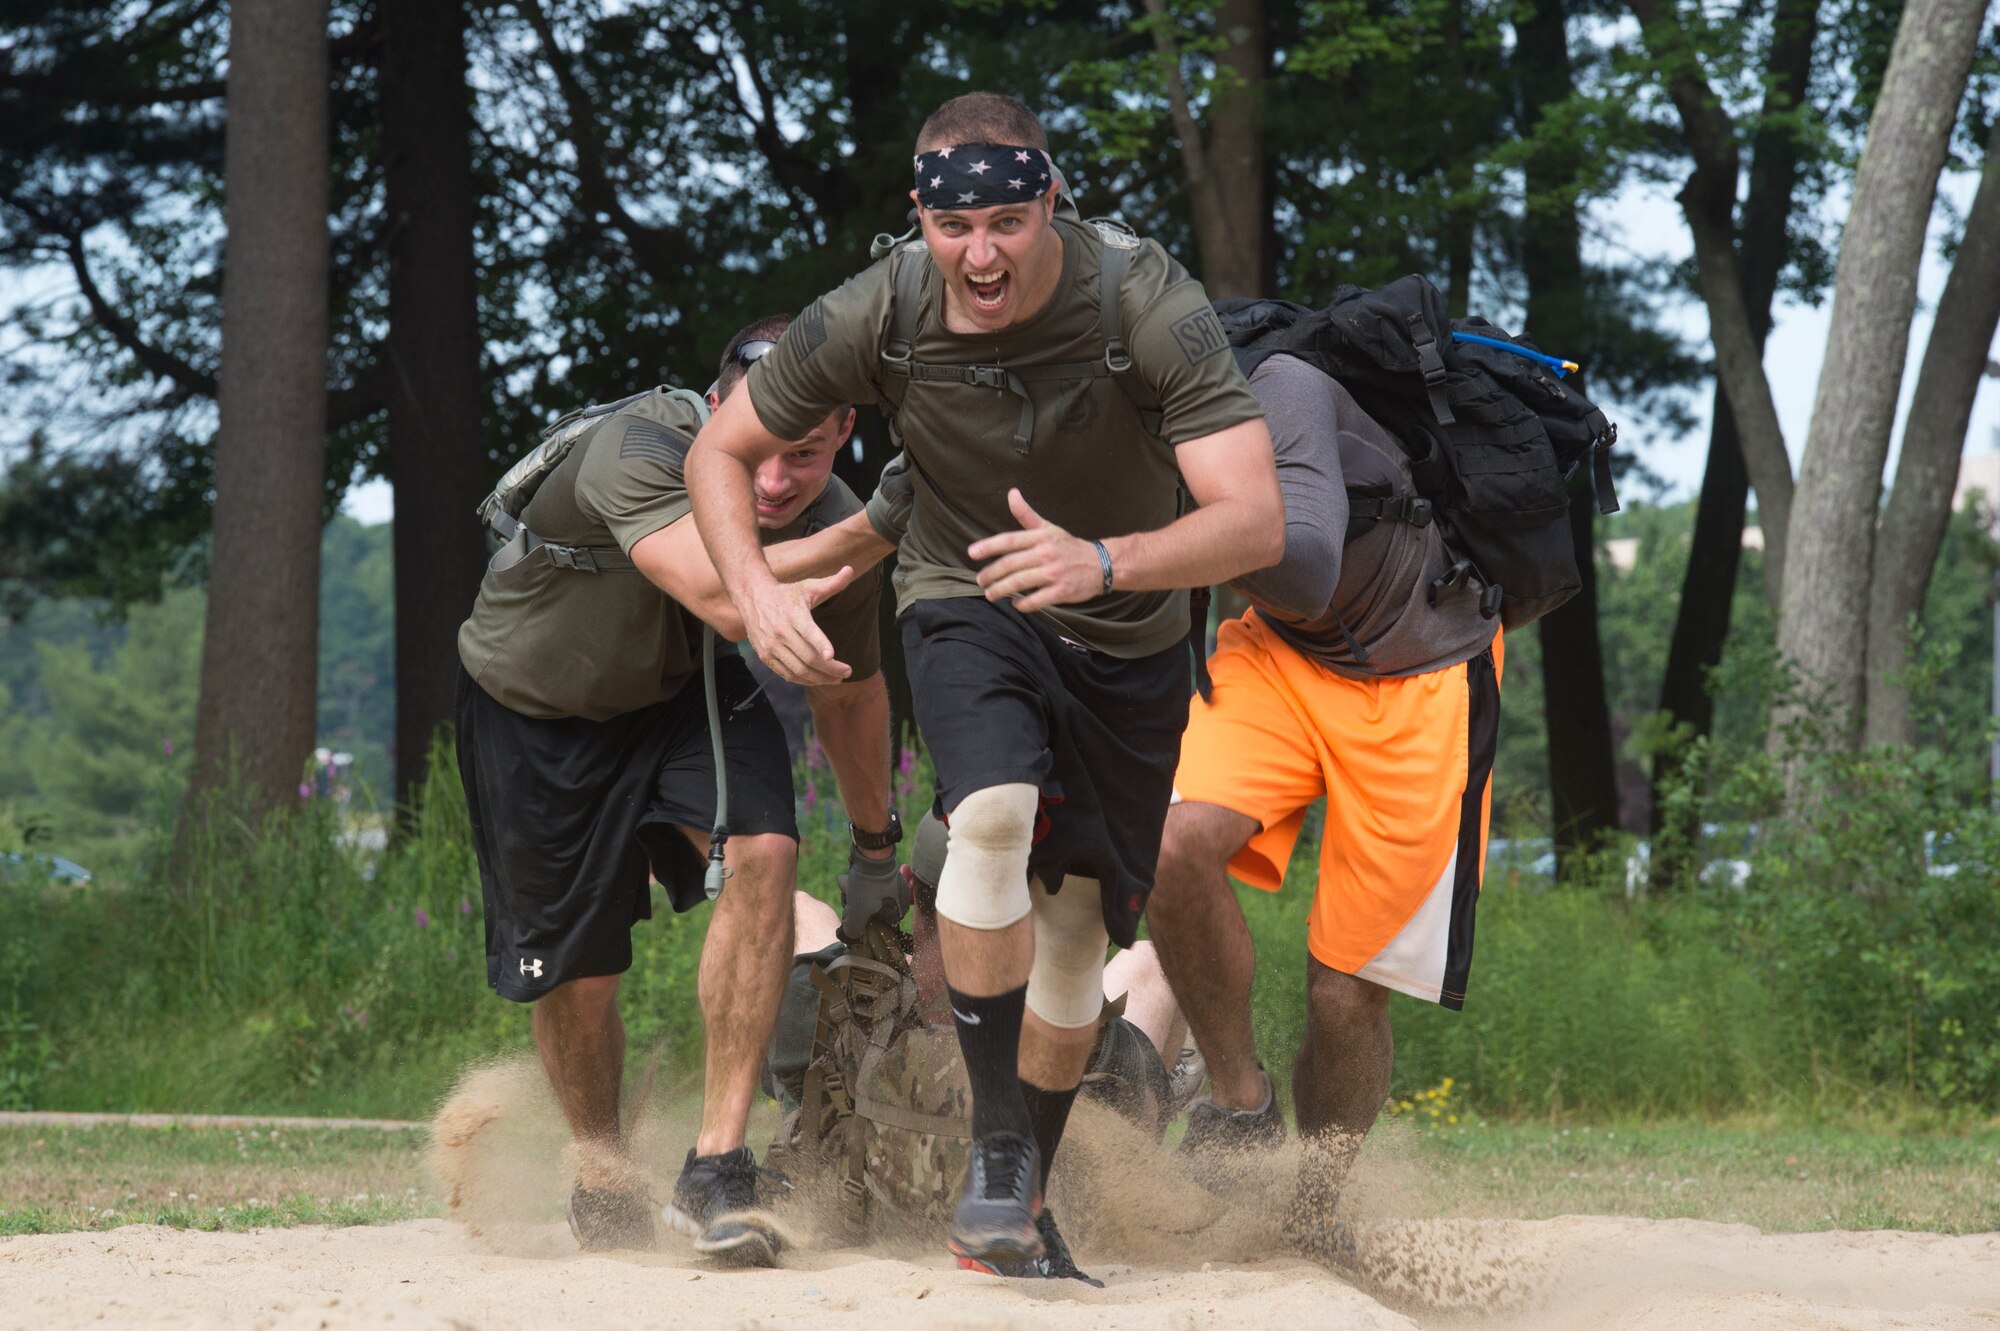 Tech. Sgt. Matthew Marquart, center, 66th Security Forces Squadron Combat Arms NCO in charge, runs across a sand pit as Staff Sgt. Meldion Shehu, left, 66 SFS training NCO, and others participate in a Team Cohesion Challenge on base July 15. Approximately 30 members of the base community participated in the event that is built around special operations training and is designed to teach leadership, promote unit cohesion and inspire teams to perform their best. (U.S. Air Force photo by Jerry Saslav)